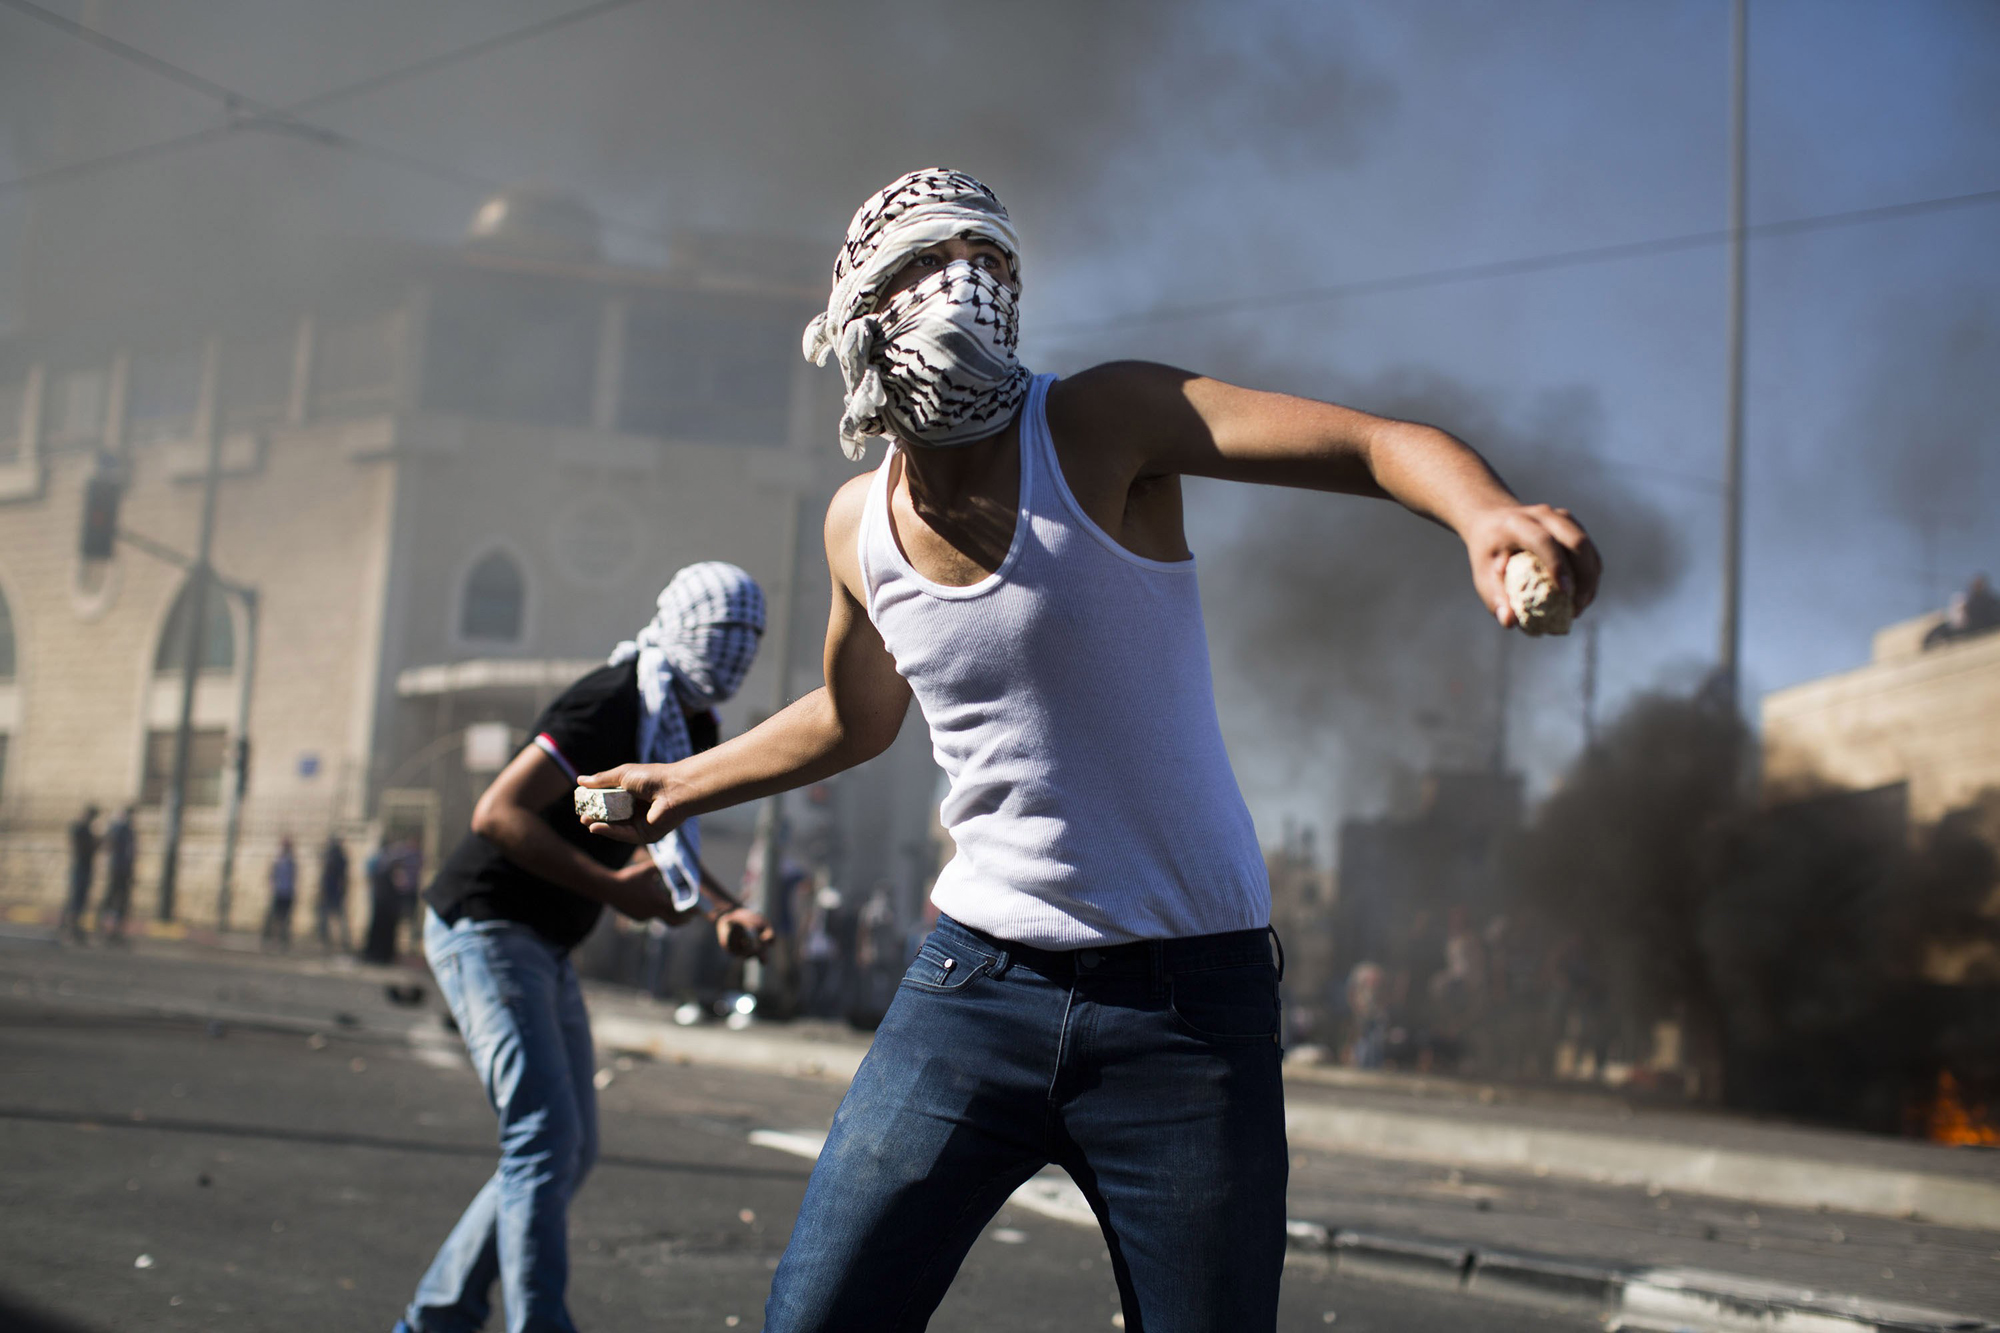 Palestinian youths clash with Israeli Police near to the house of murdered Palestinian teenager Mohammed Abu Khdair, in Jerusalem on July 2.